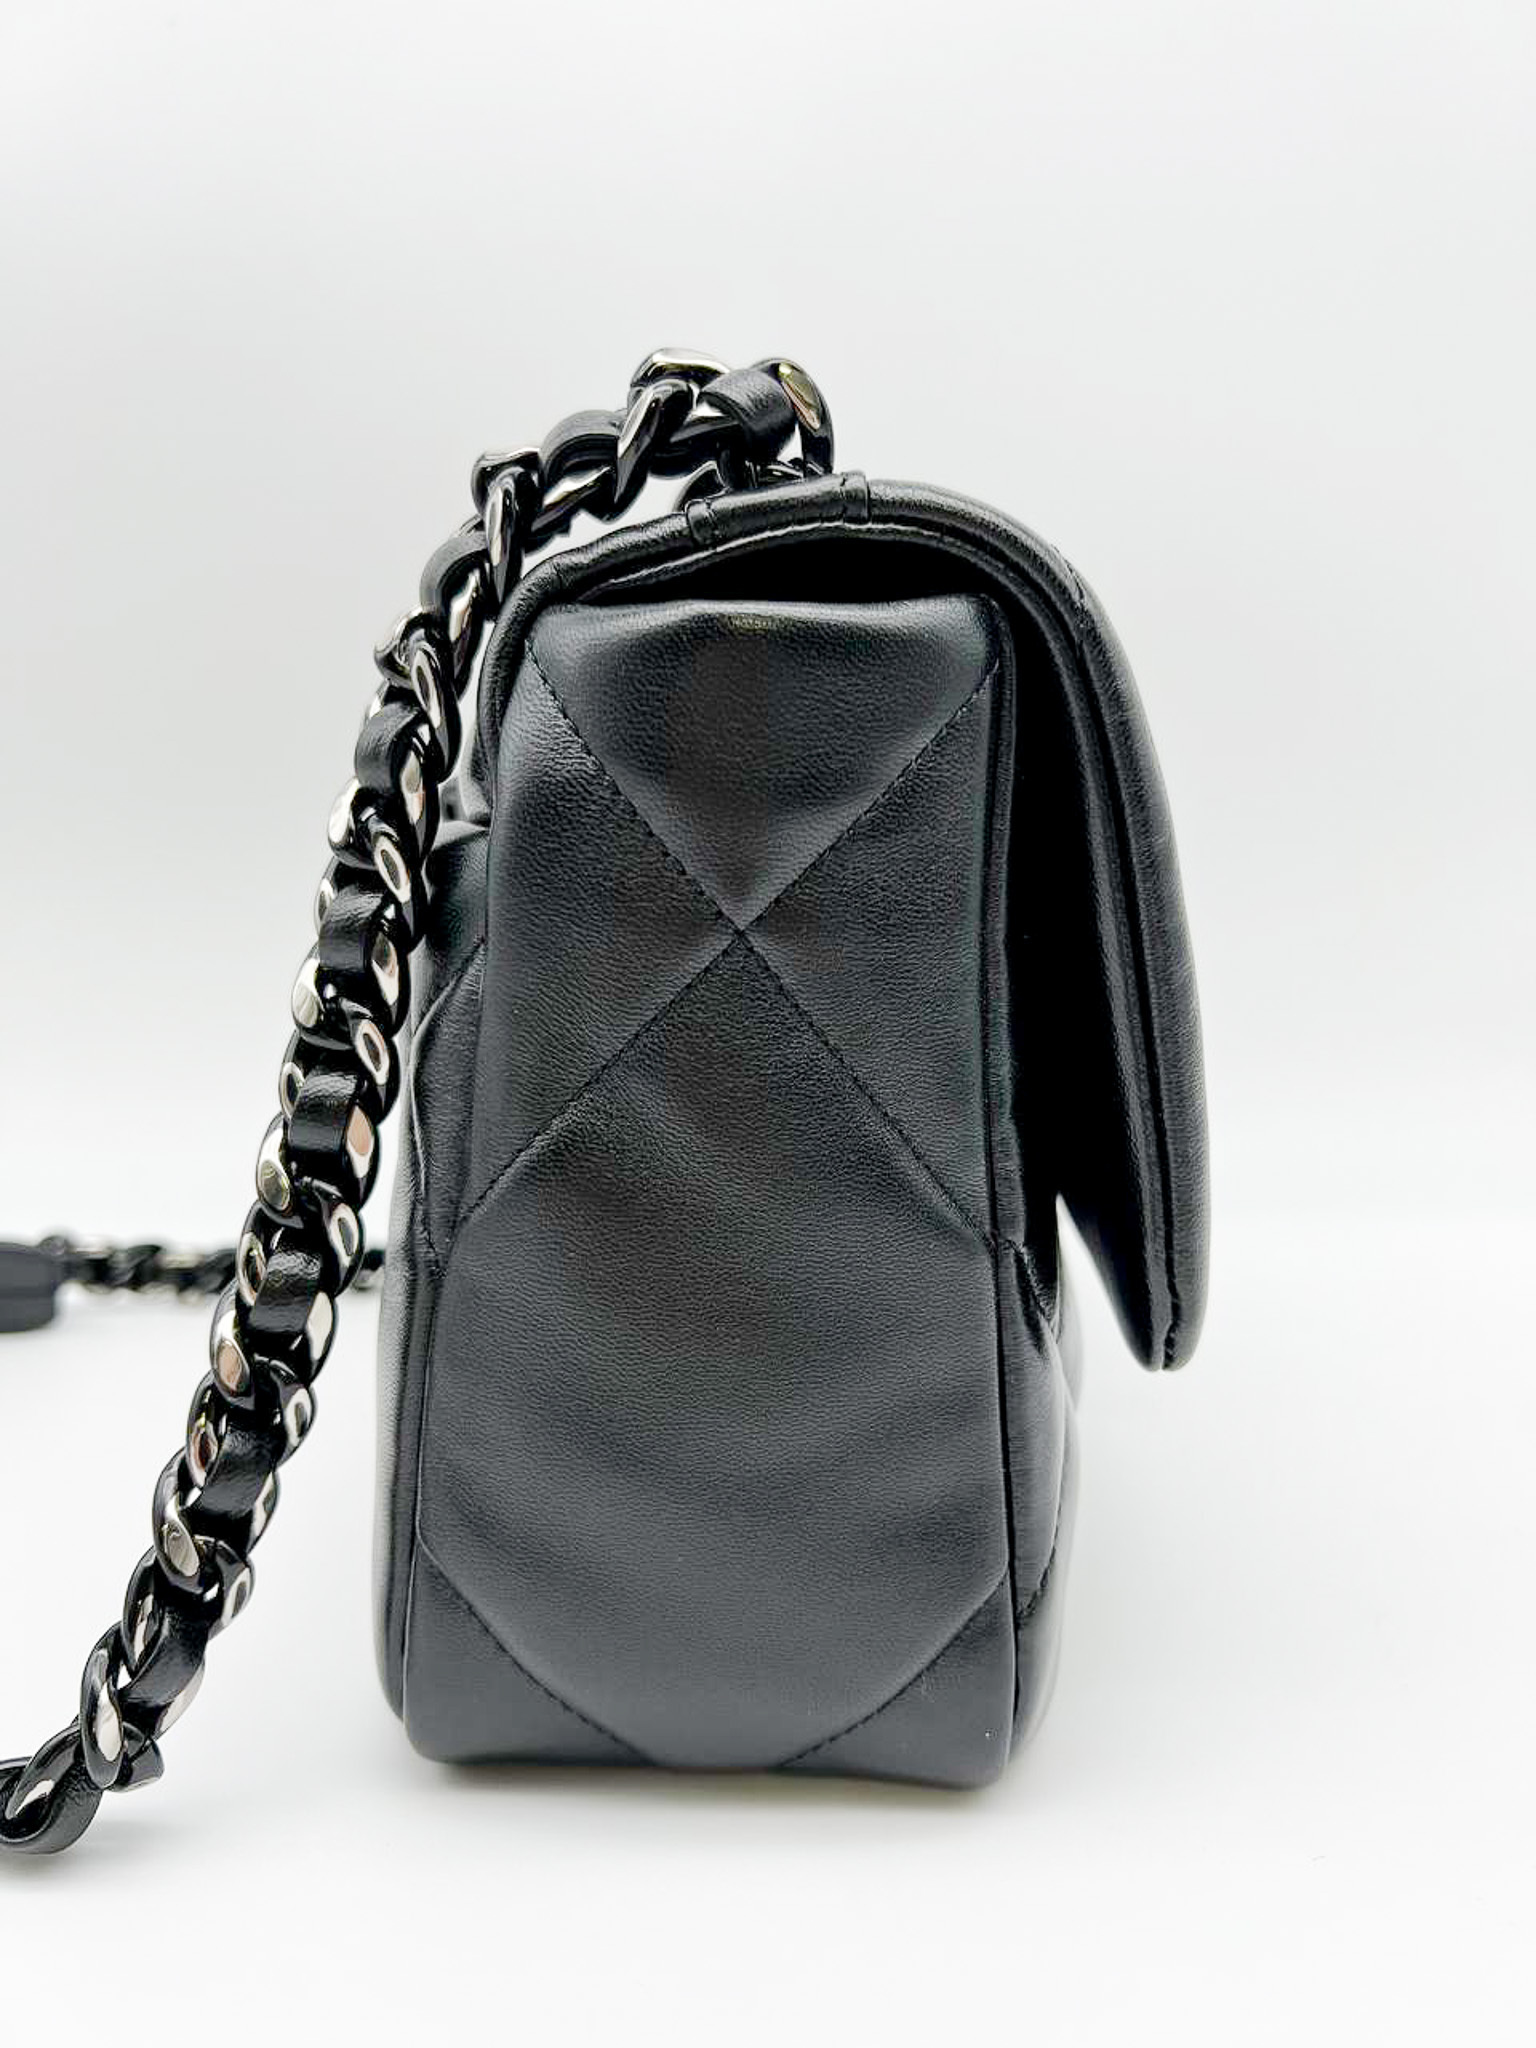 Chanel 19 Small, Black Leather with Mixed So Black and Silver Hardware, New  in Box MA001 - Julia Rose Boston